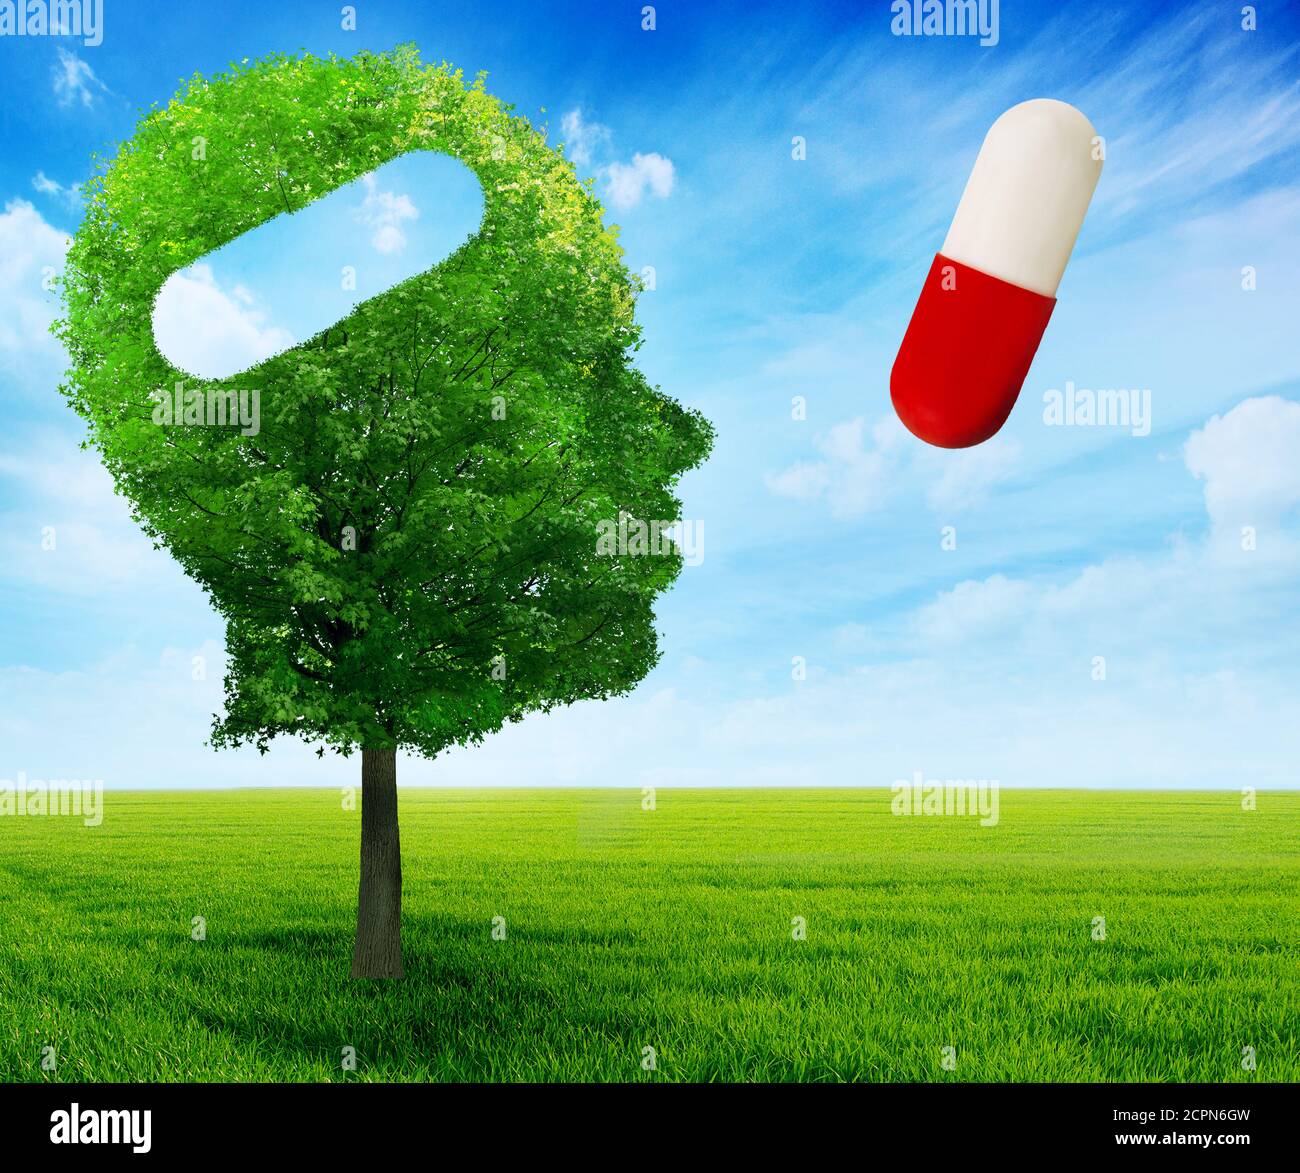 Puzzle head brain mental health symbol idea concept. Tree in a shape of human head face profile with cut out of pill treatment medication drug isolate Stock Photo